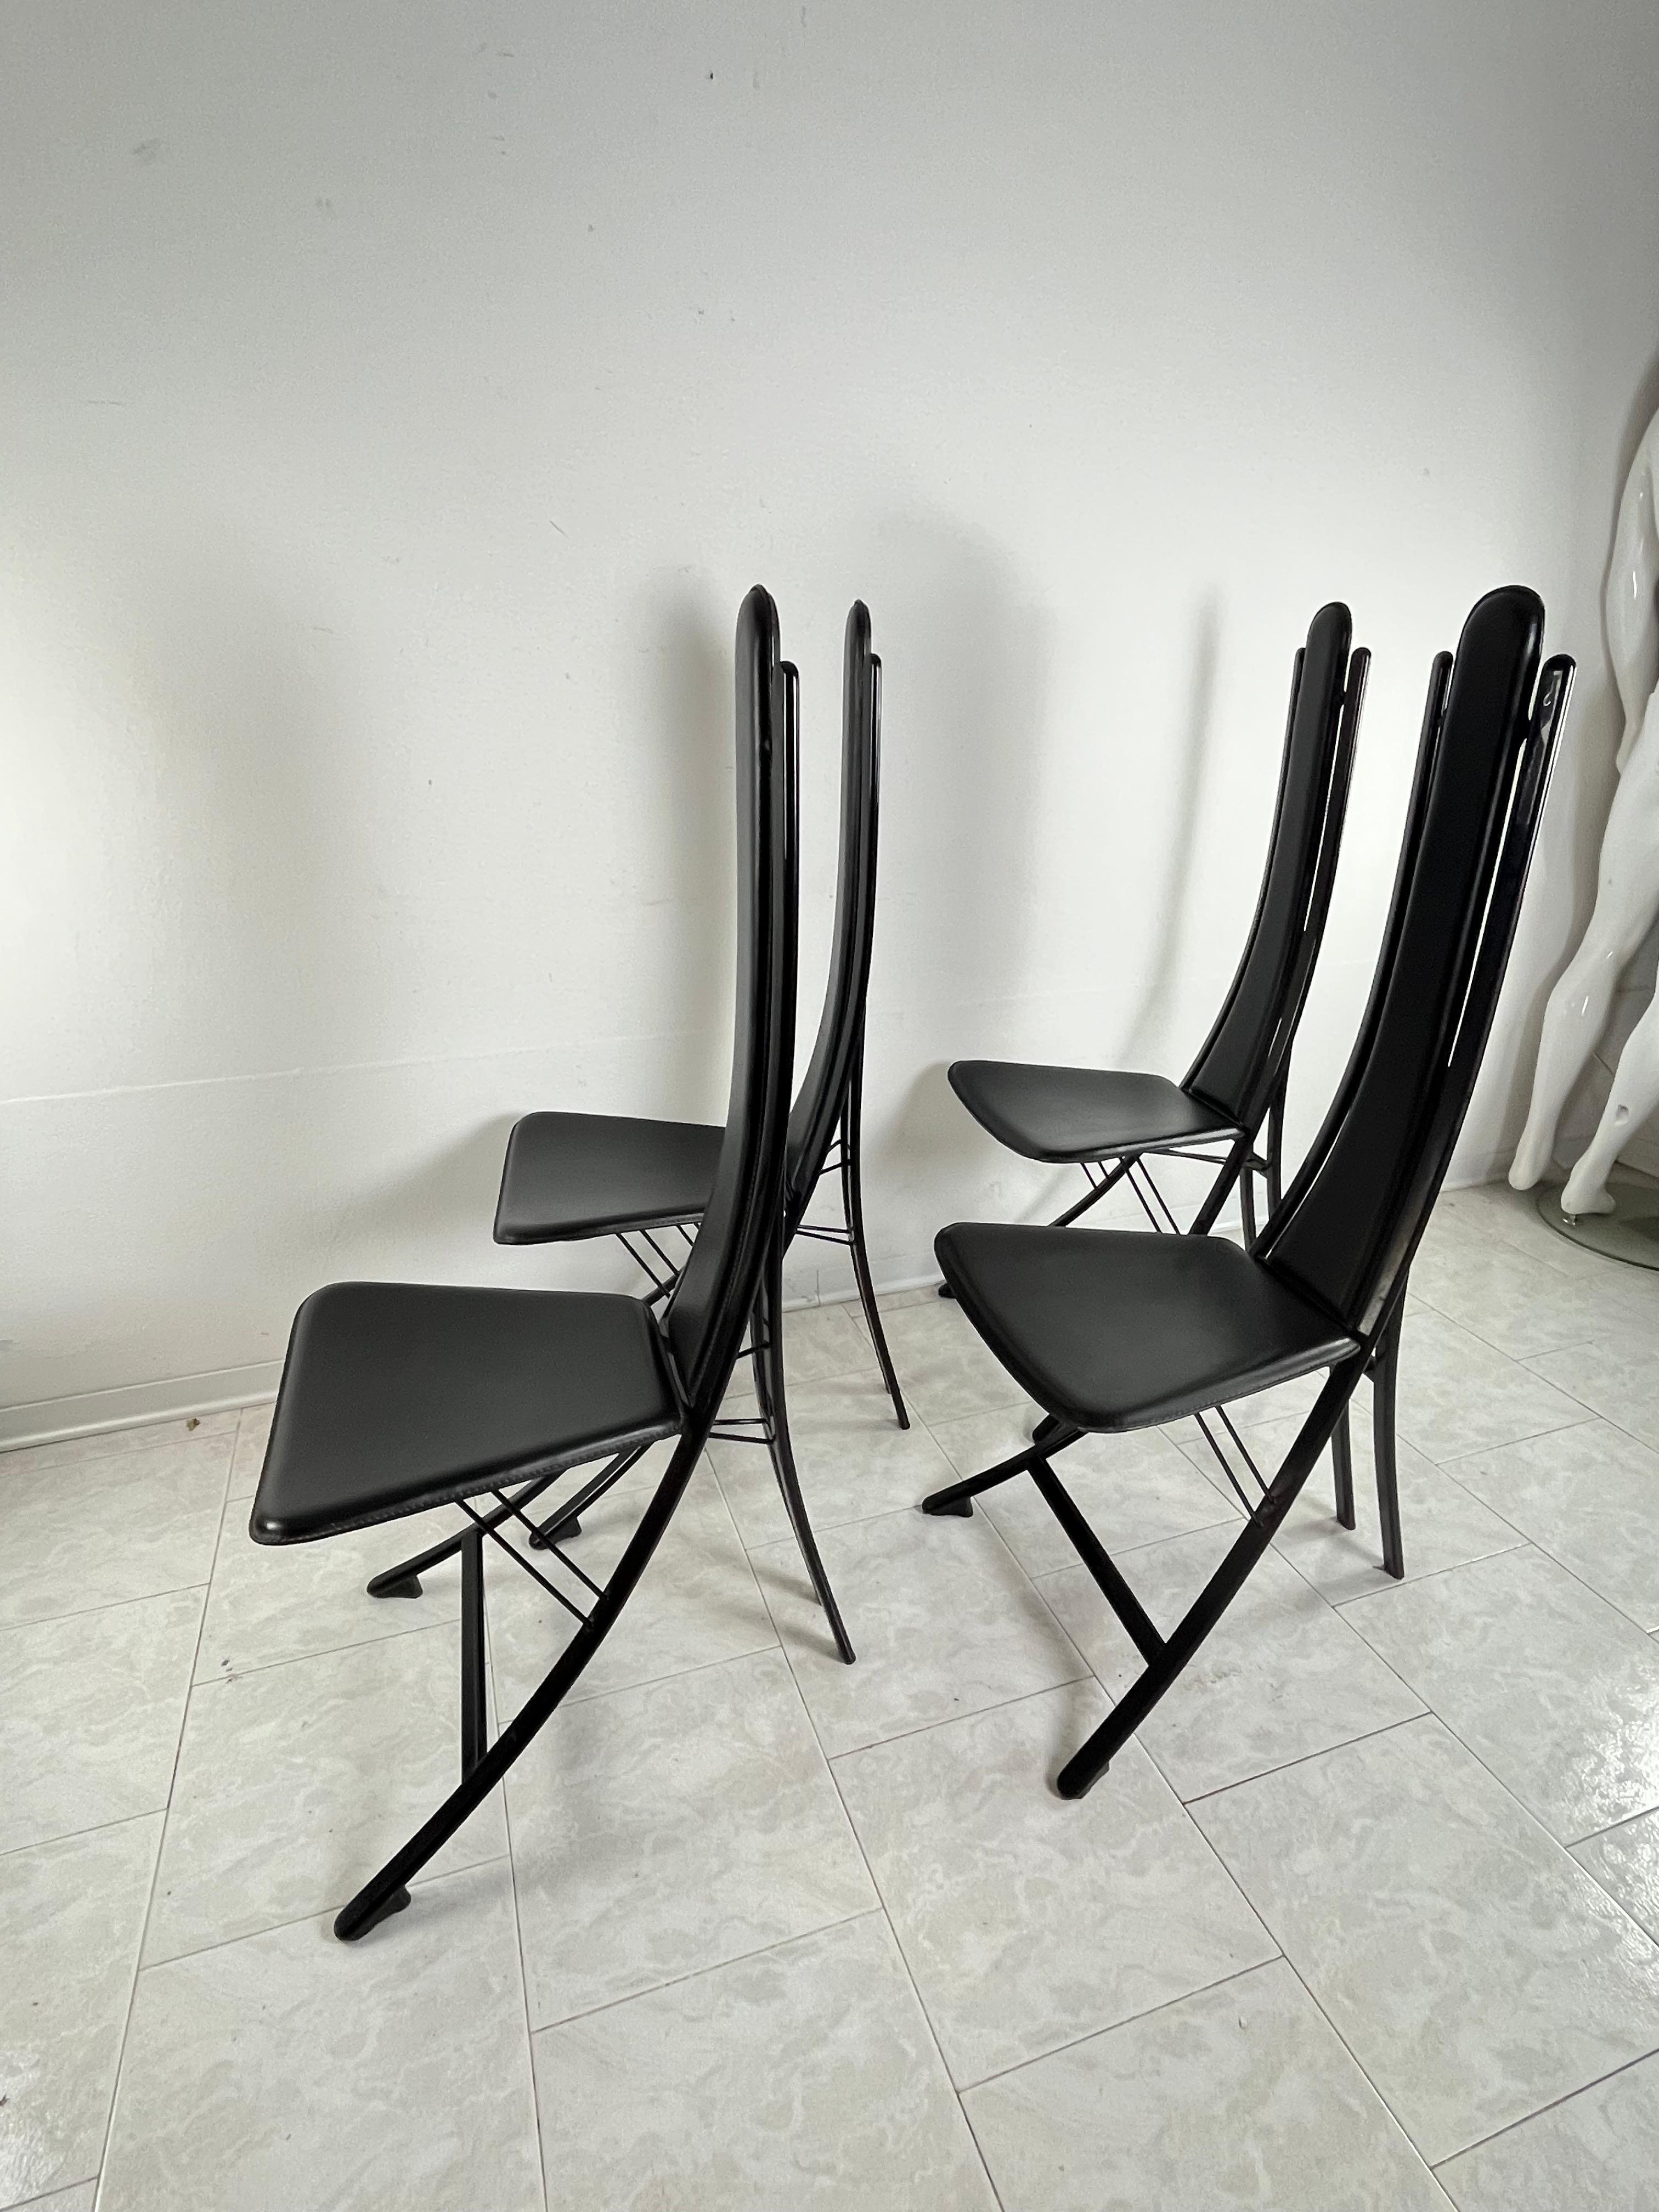 Vintage Set Of 4 Steel And Leather Chairs Attributed To Recanatini 1980s In Good Condition For Sale In Palermo, IT